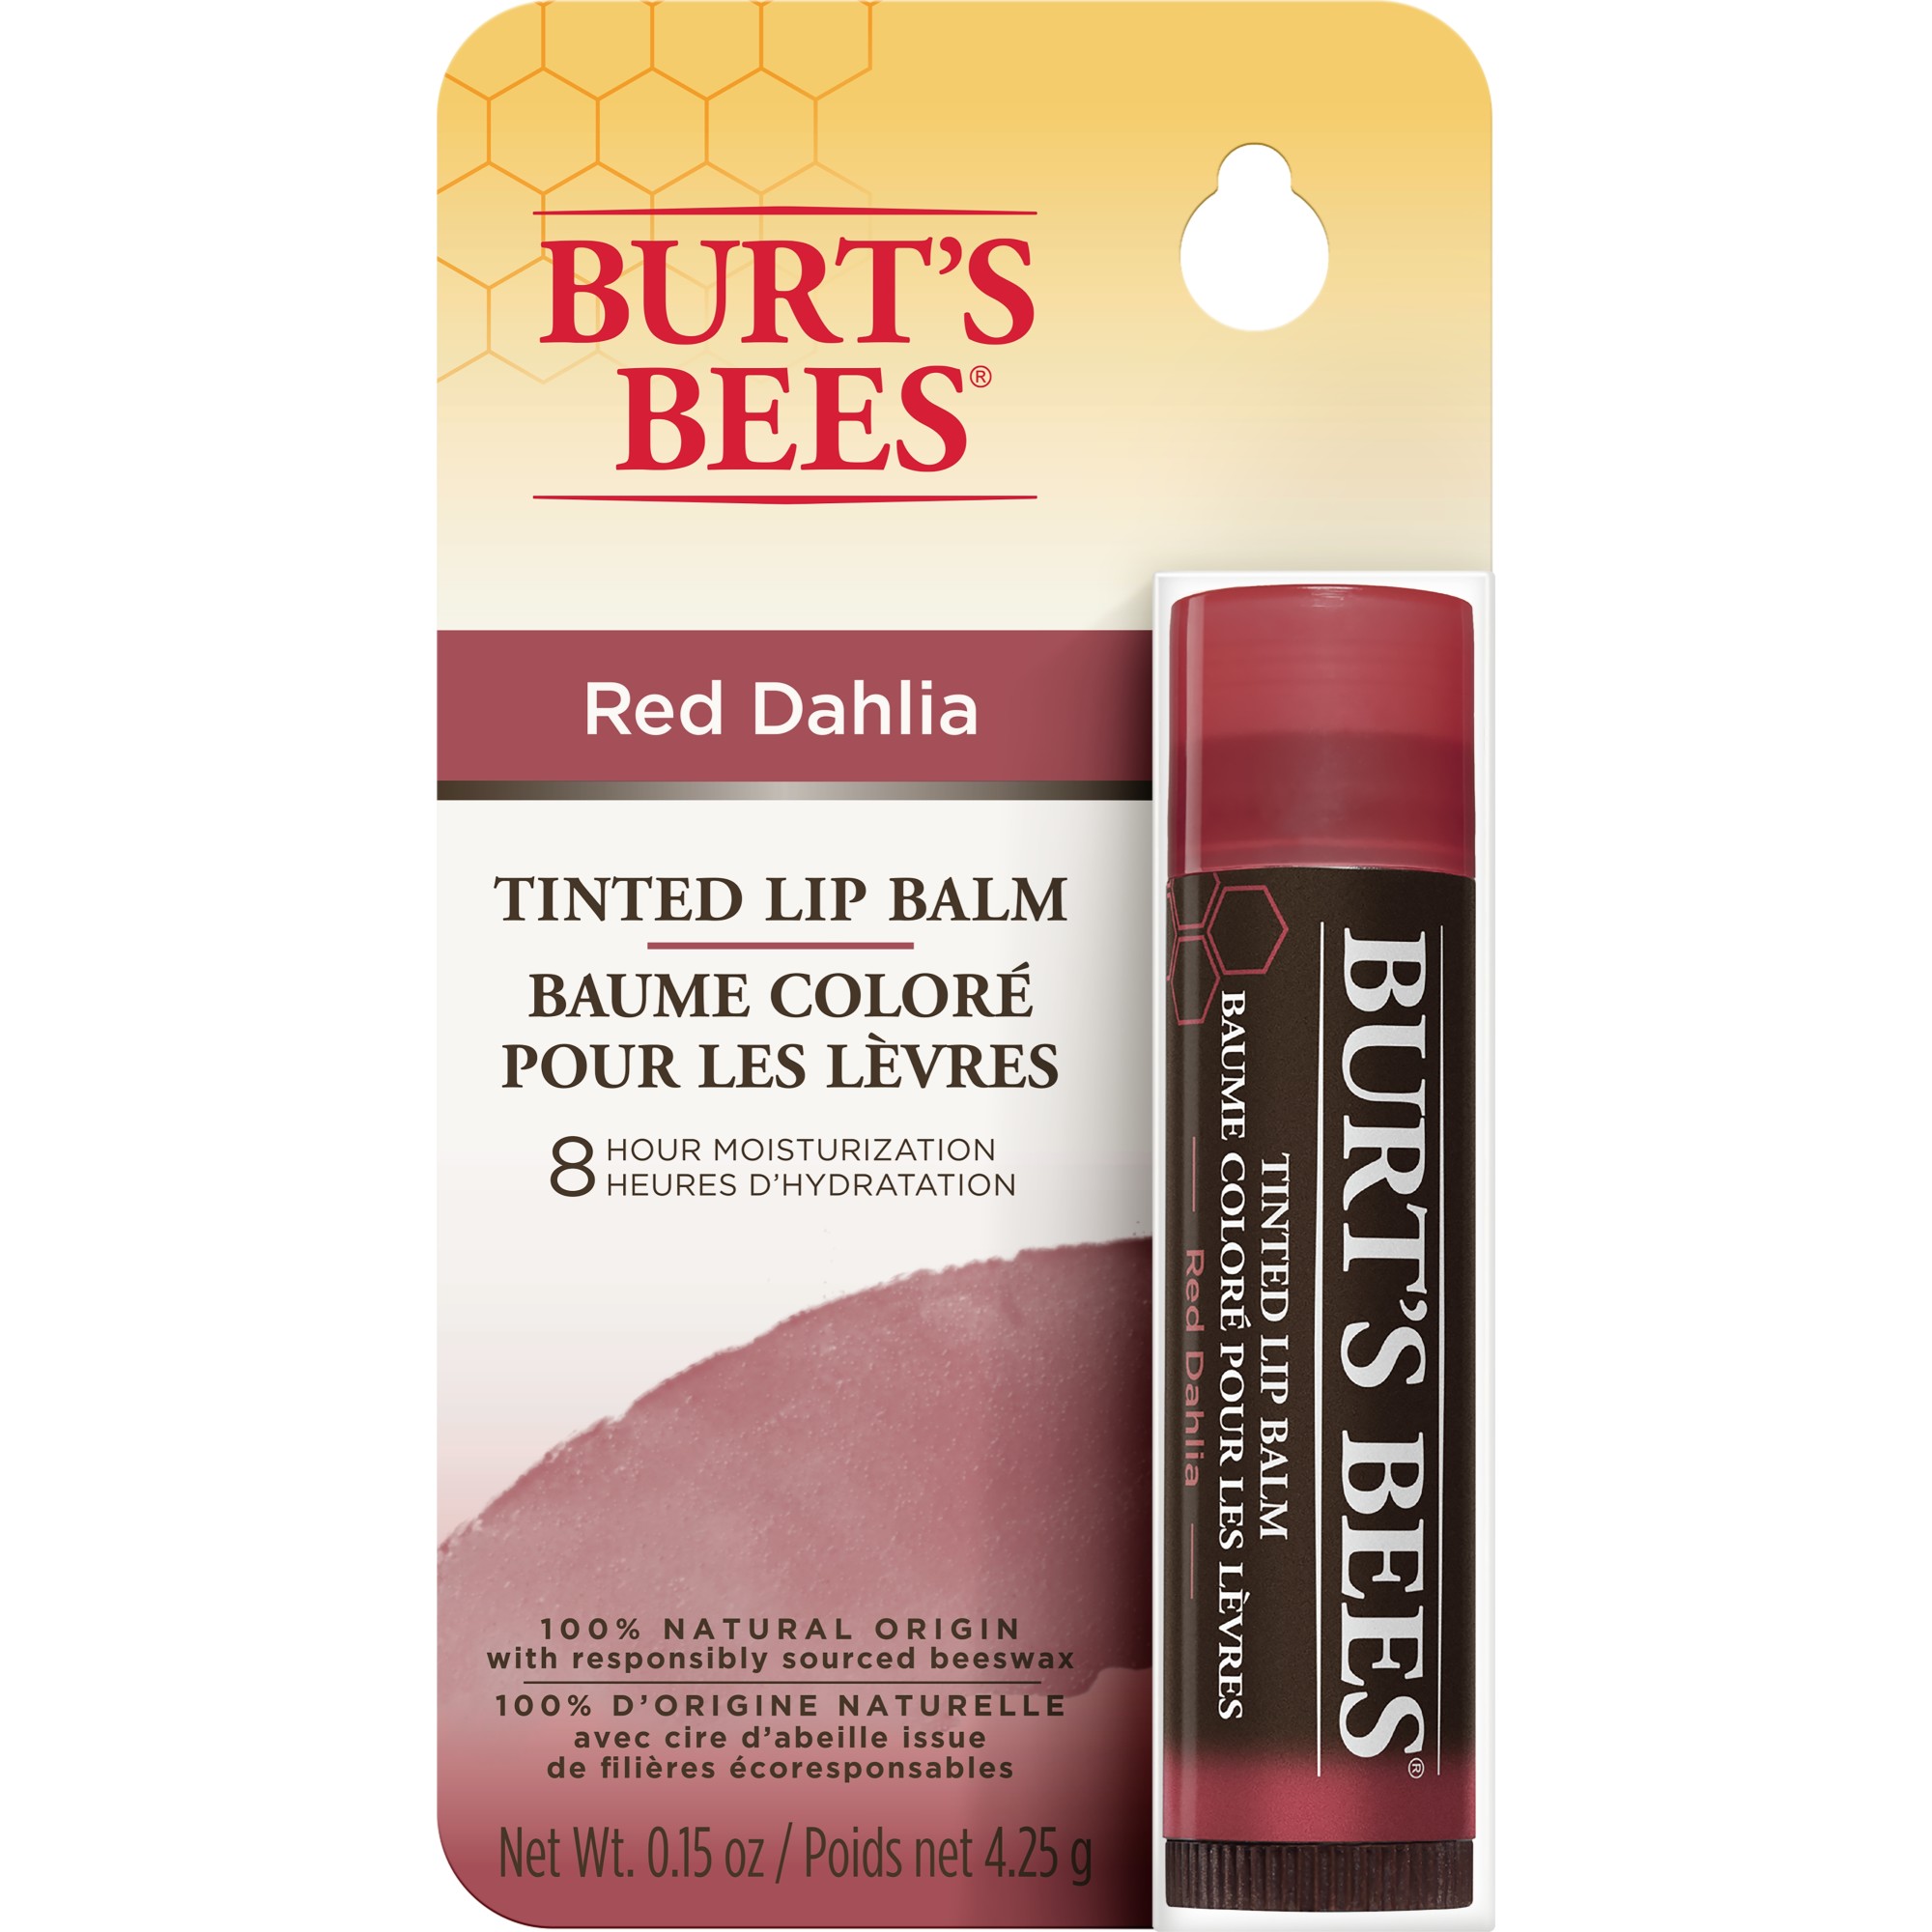 Burt's Bees 100% Natural Tinted Lip Balm, Red Dahlia with Shea Butter & Botanical Waxes  1 Tube - image 1 of 13